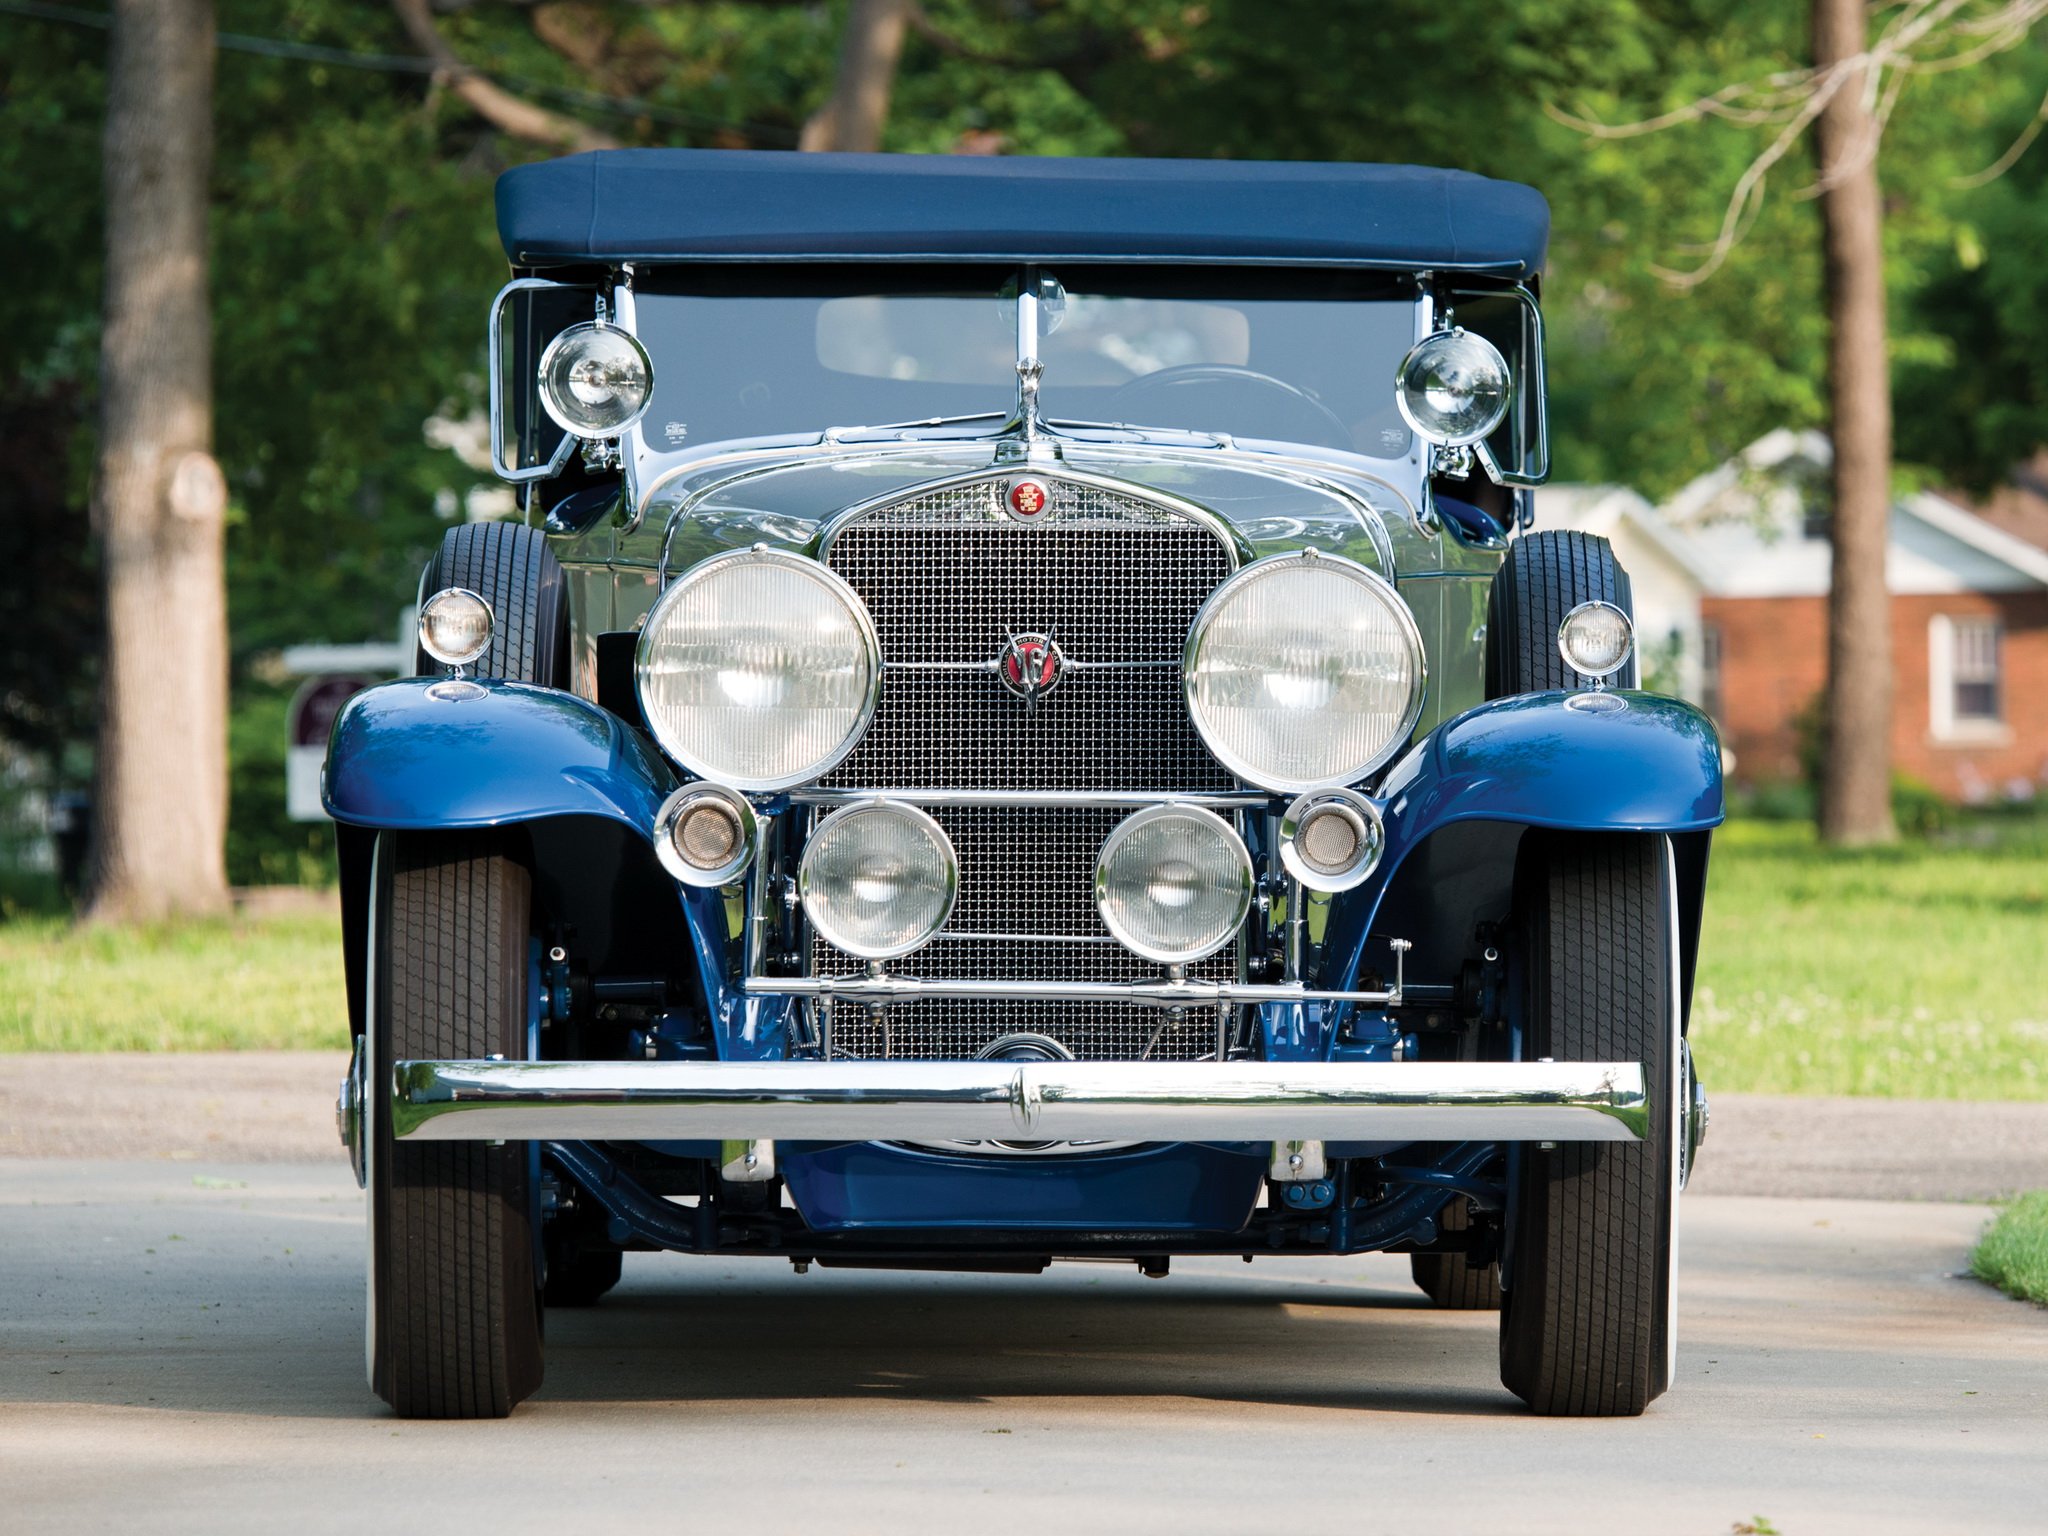 1930 Cadillac V16 452 Sport Phaeton Fleetwood 4260 Luxury Retro Wallpapers Hd Desktop And Mobile Backgrounds